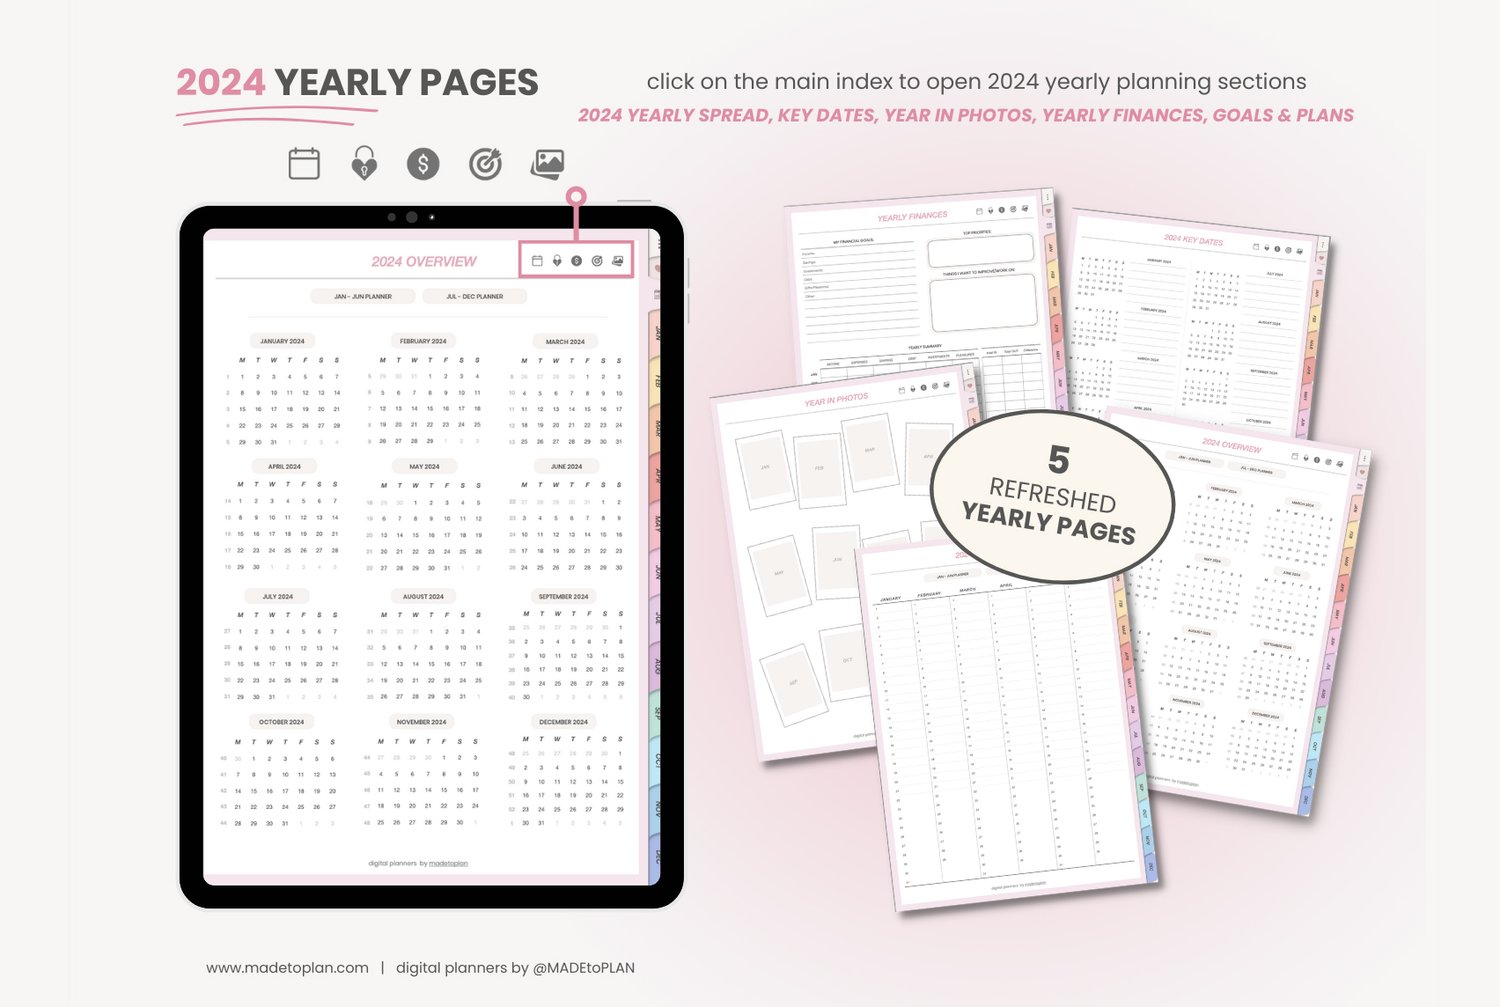 2024 Digital Planner - COLORFUL Tabs + PAGES — 2024 Digital Planners by  MADEtoPLAN